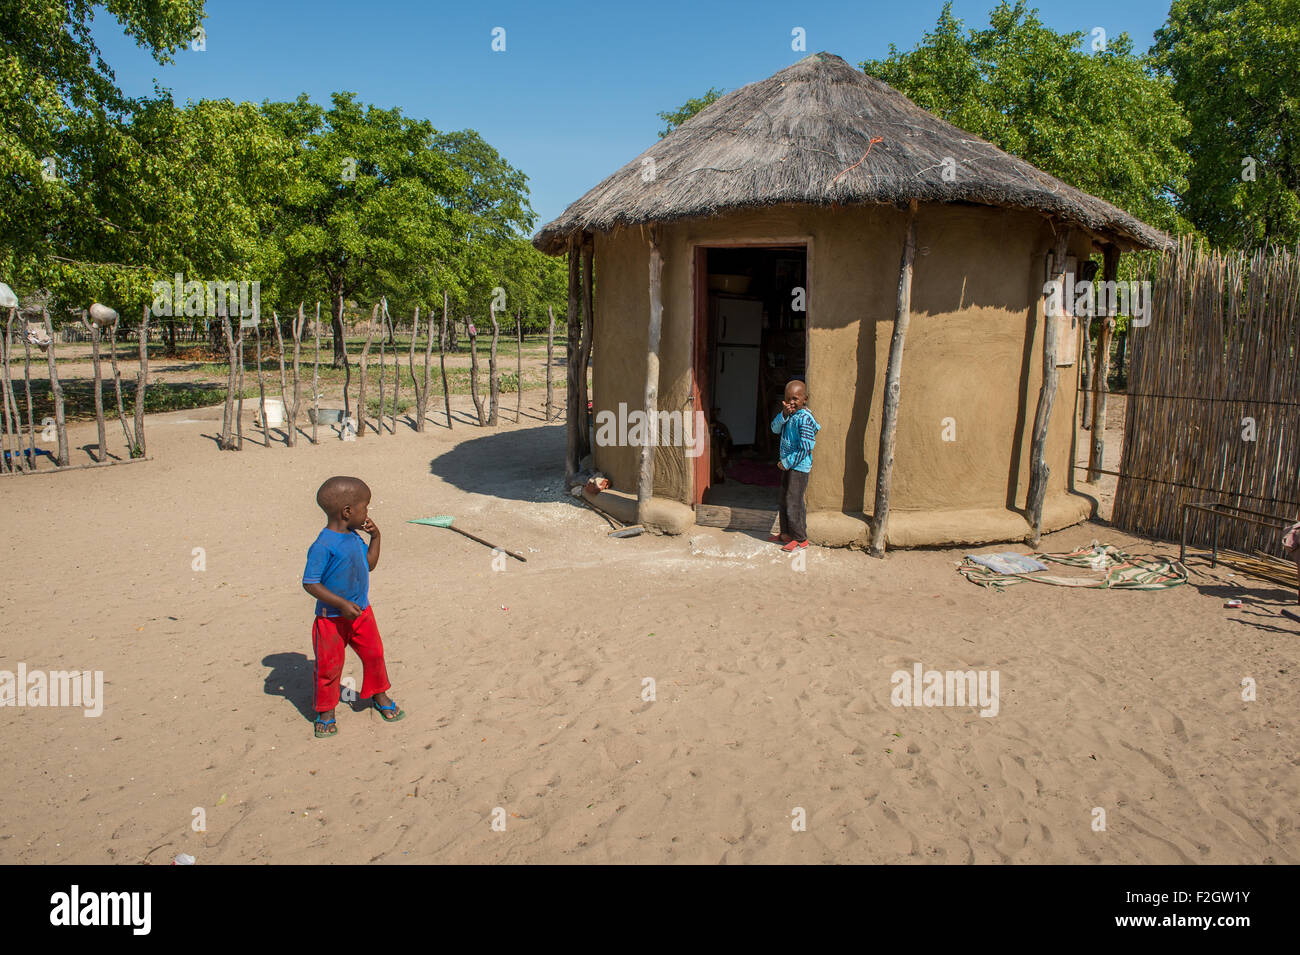 African children playing in front of a thatched roof hut in Botswana, Africa Stock Photo